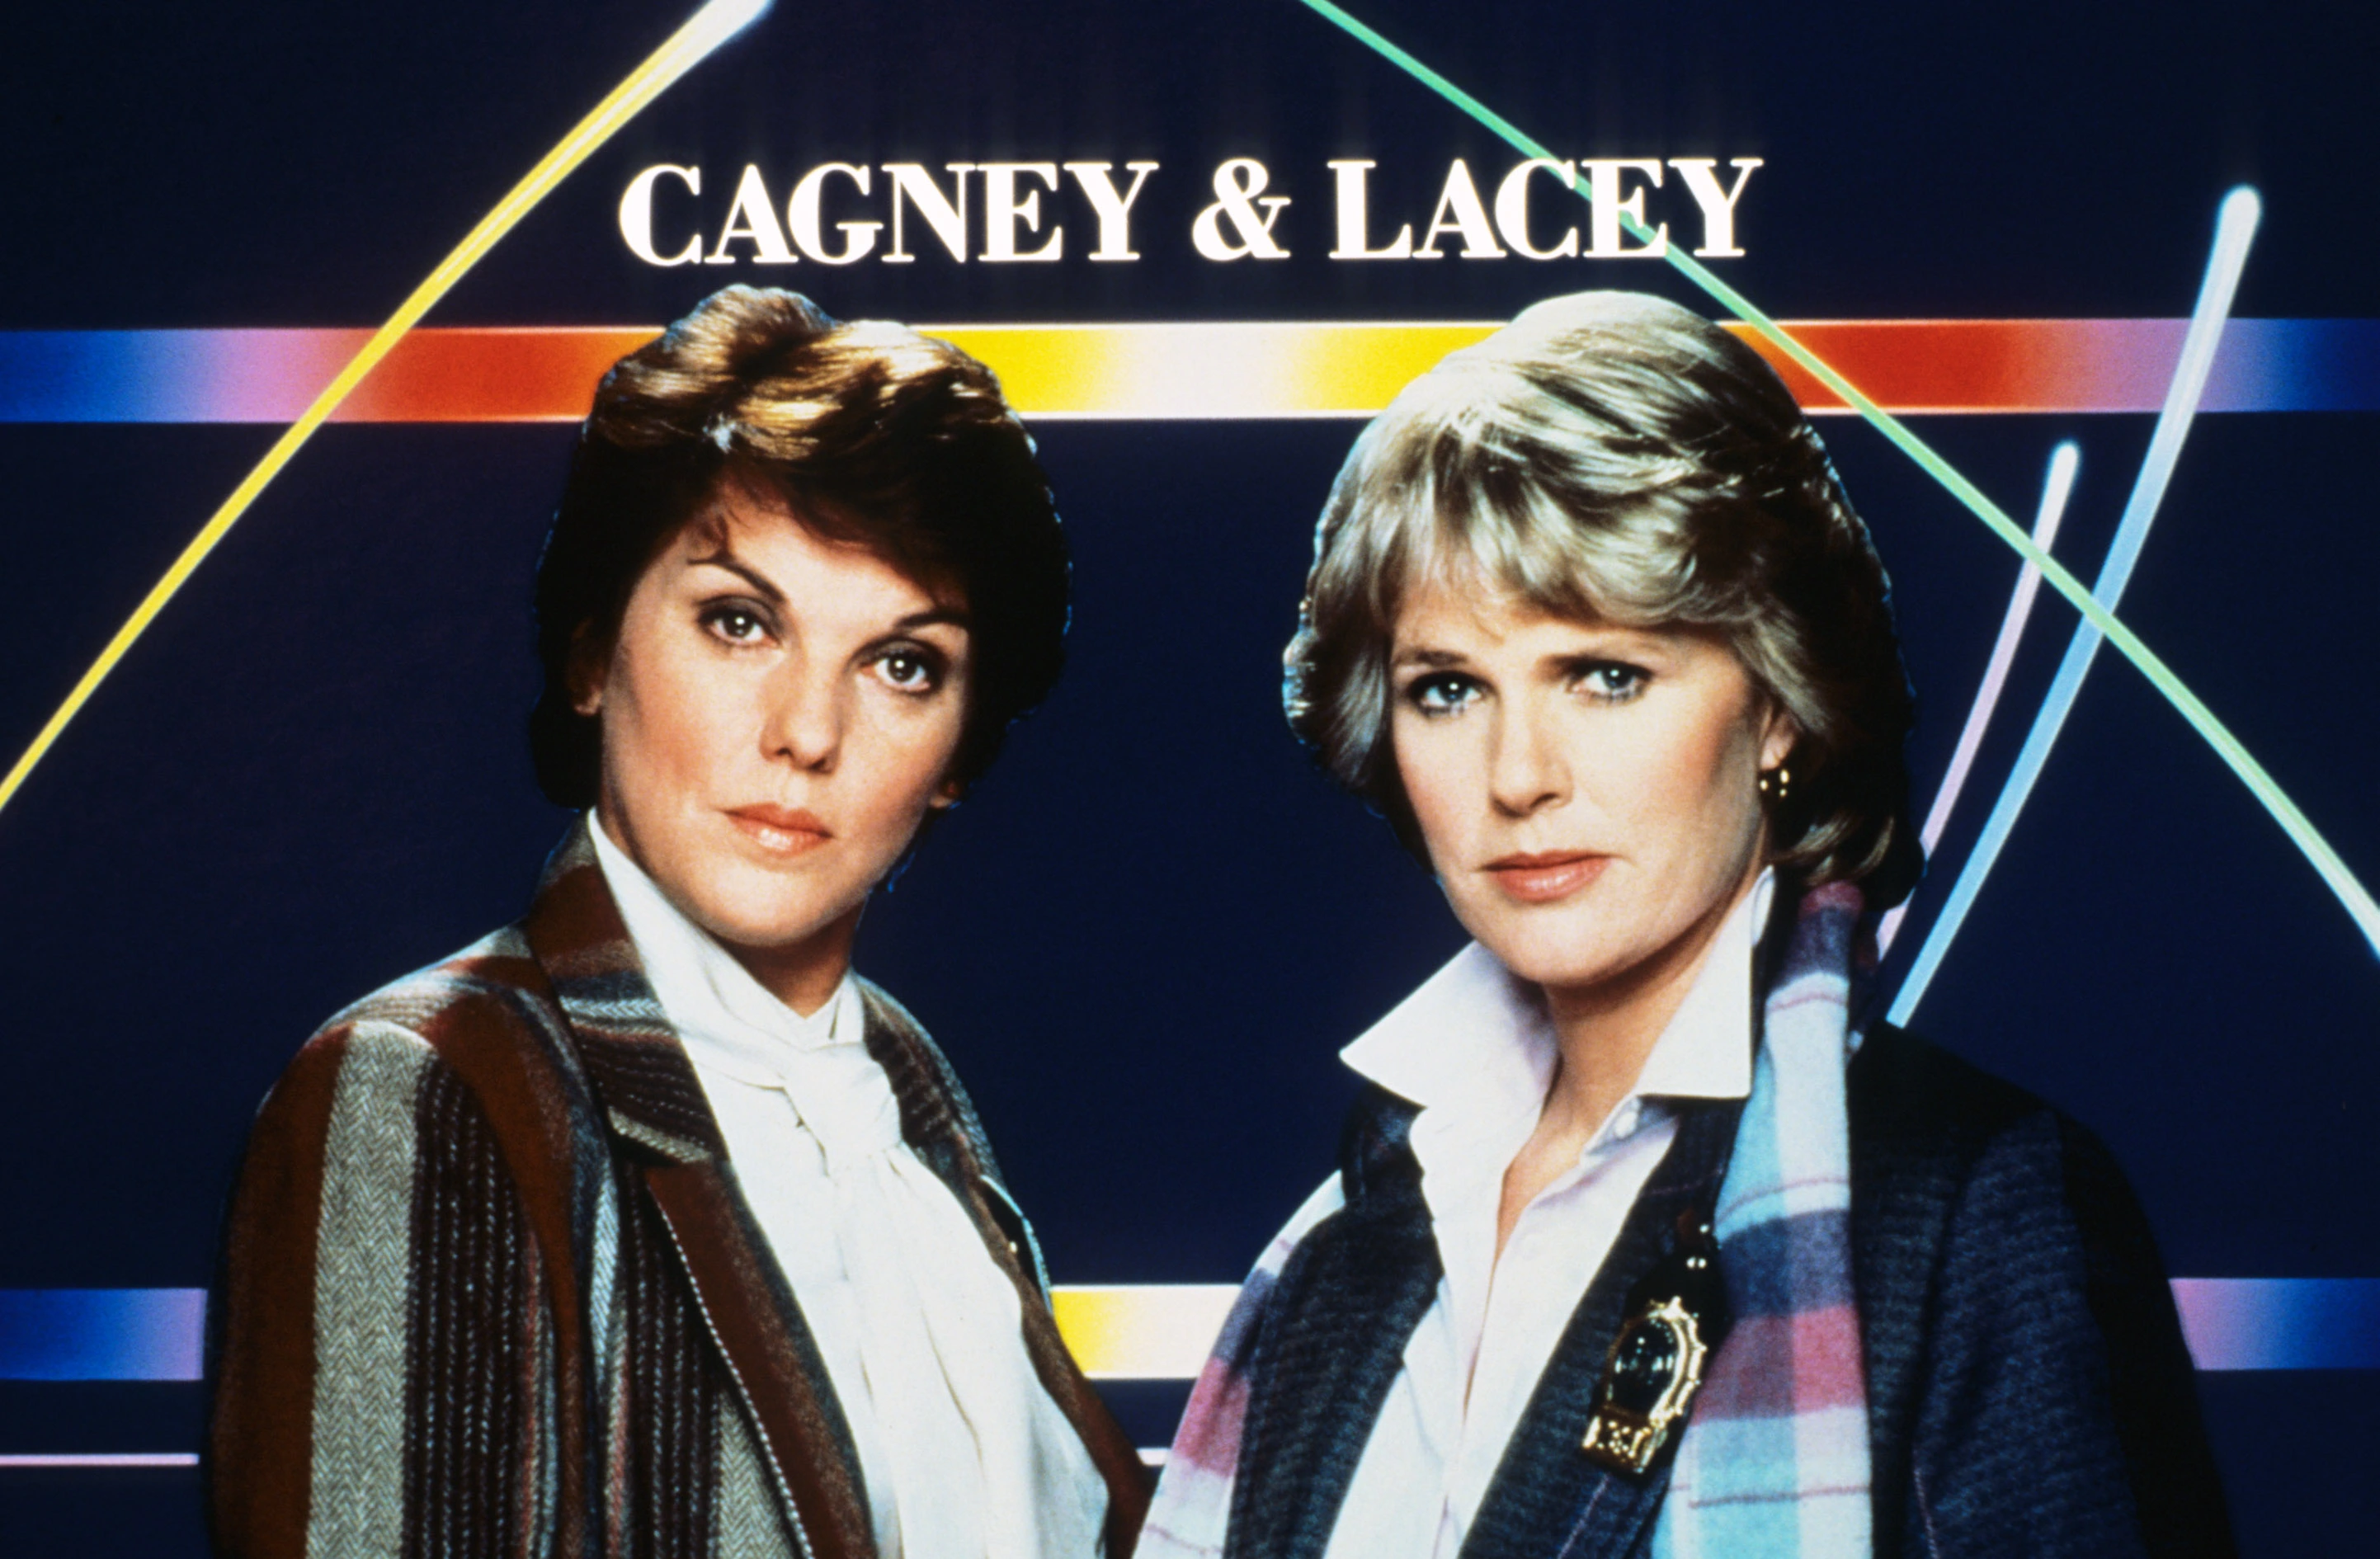 Cagney & Lacey show